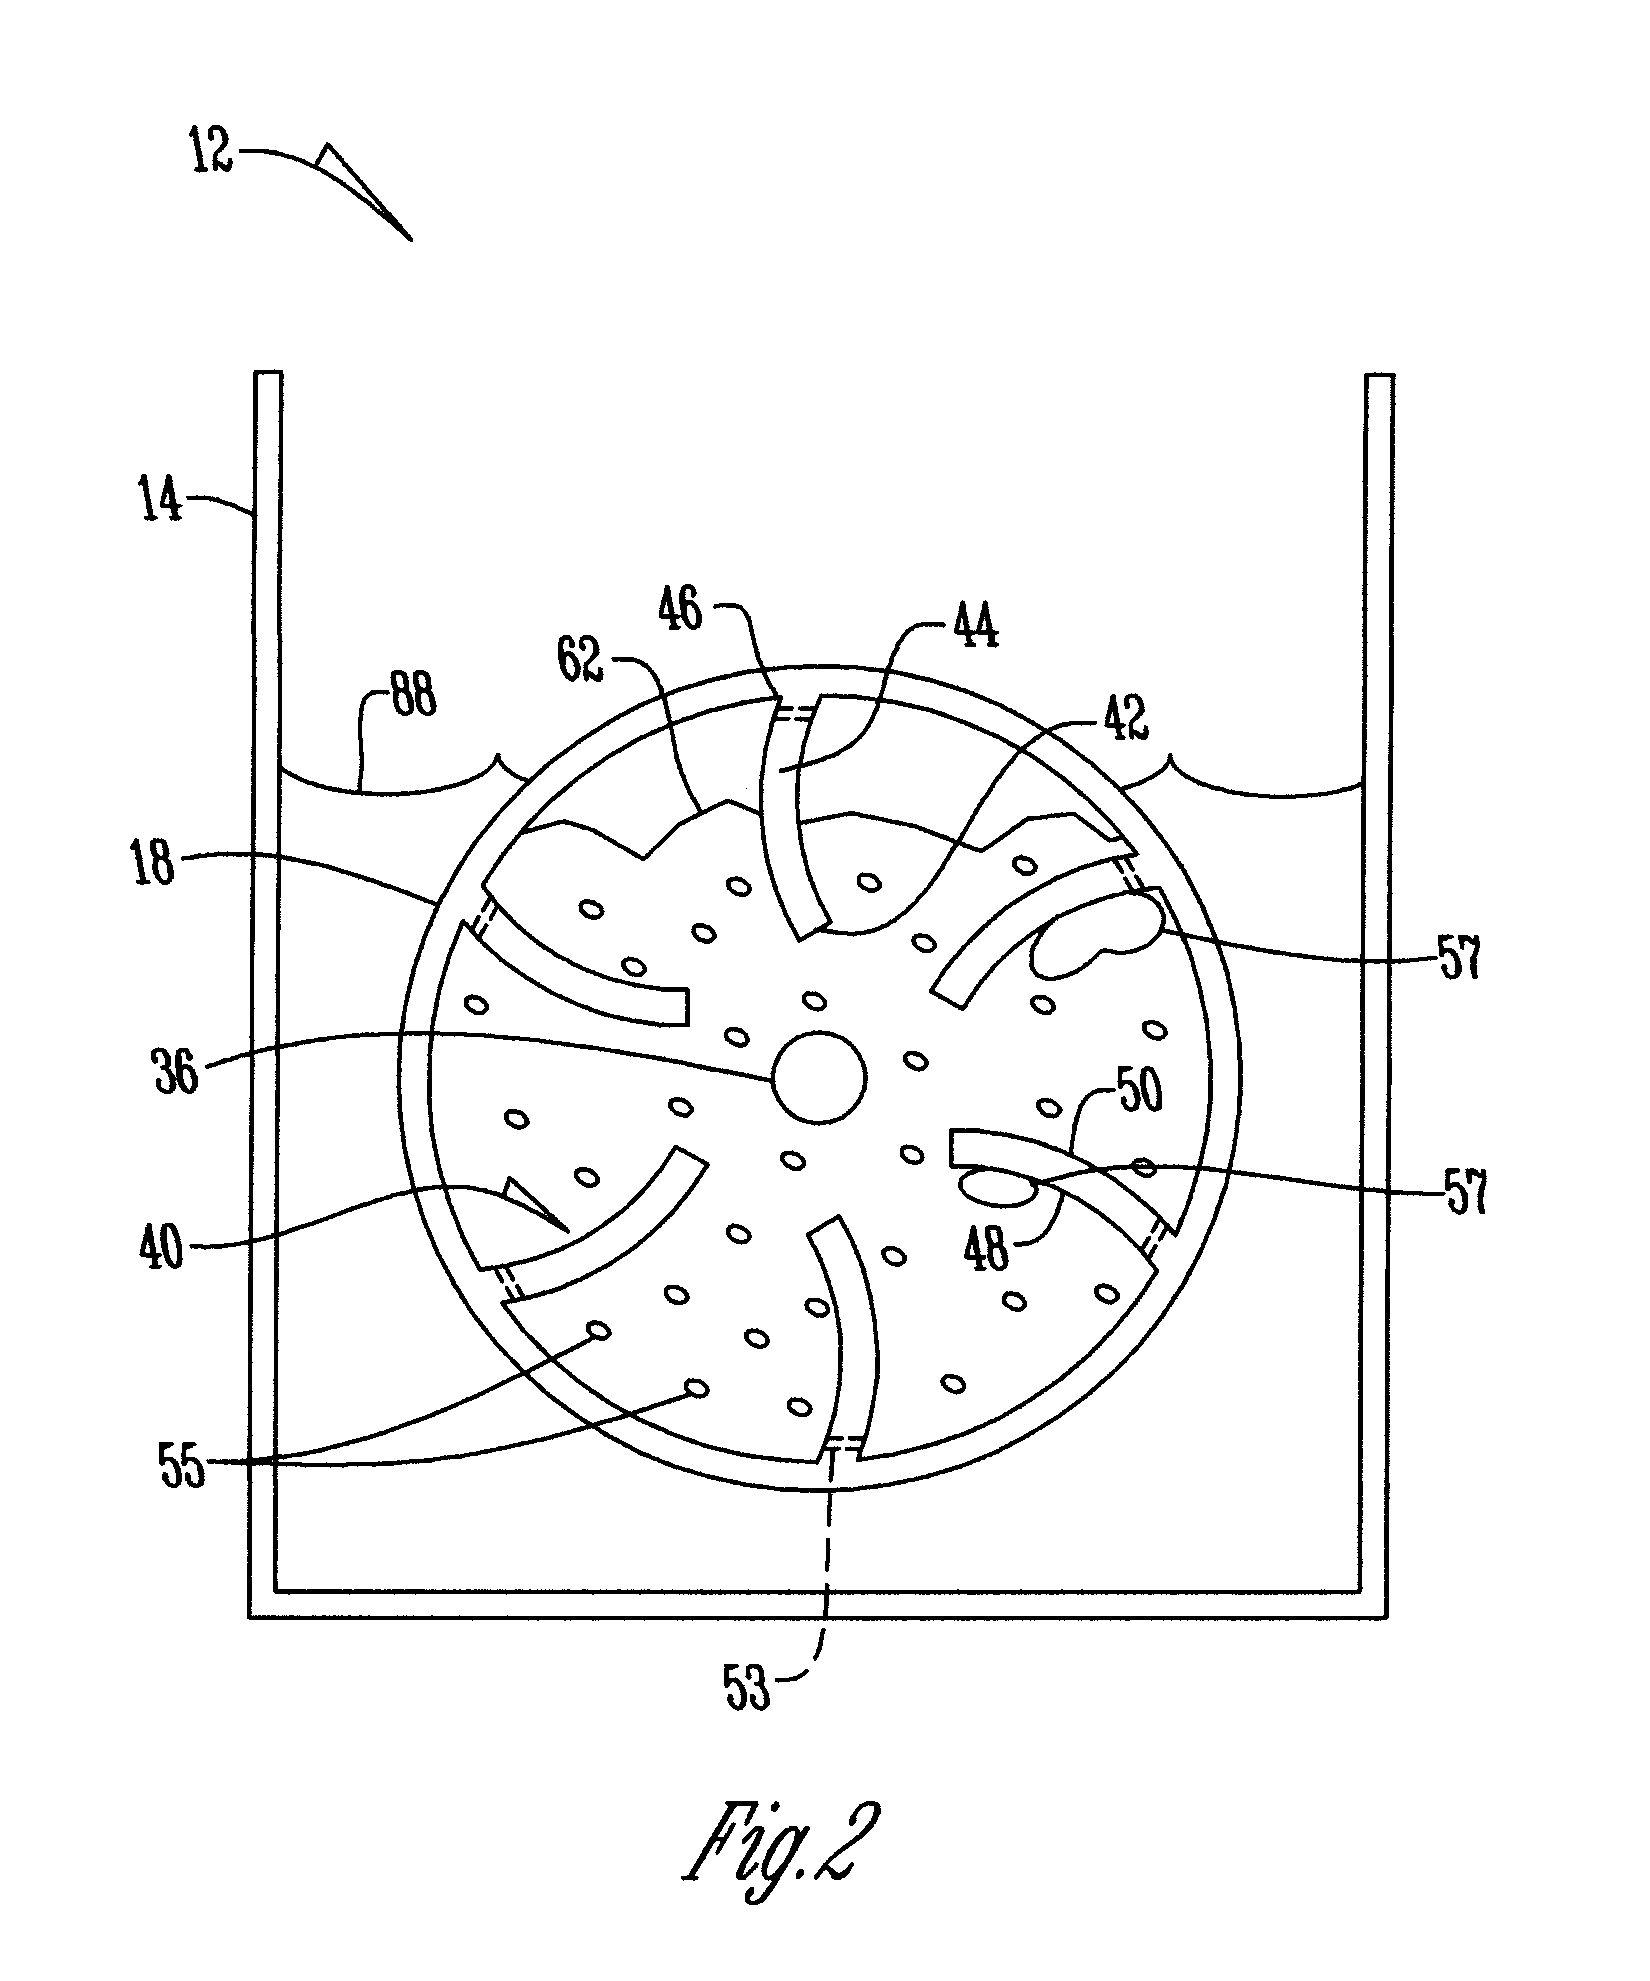 Apparatus and method of using an agricultural waste digester and biogas generation system